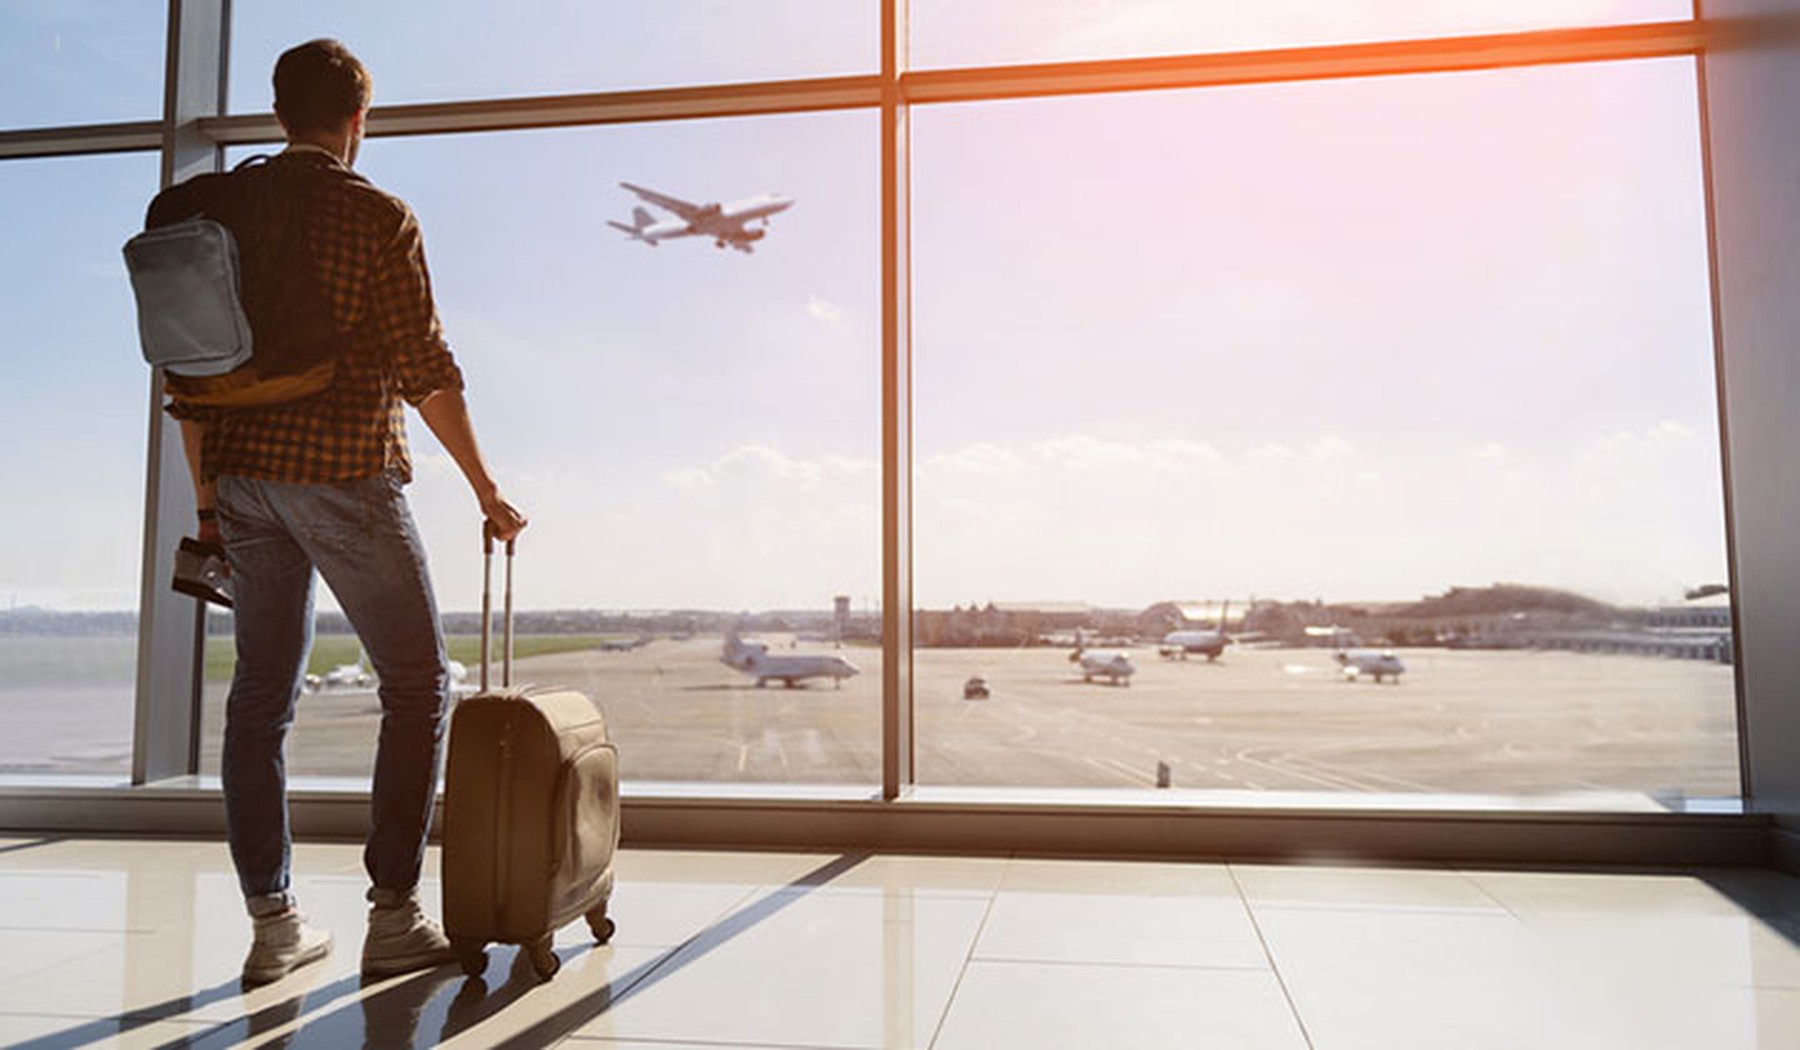 Man with rolling luggage staring at plane taking off